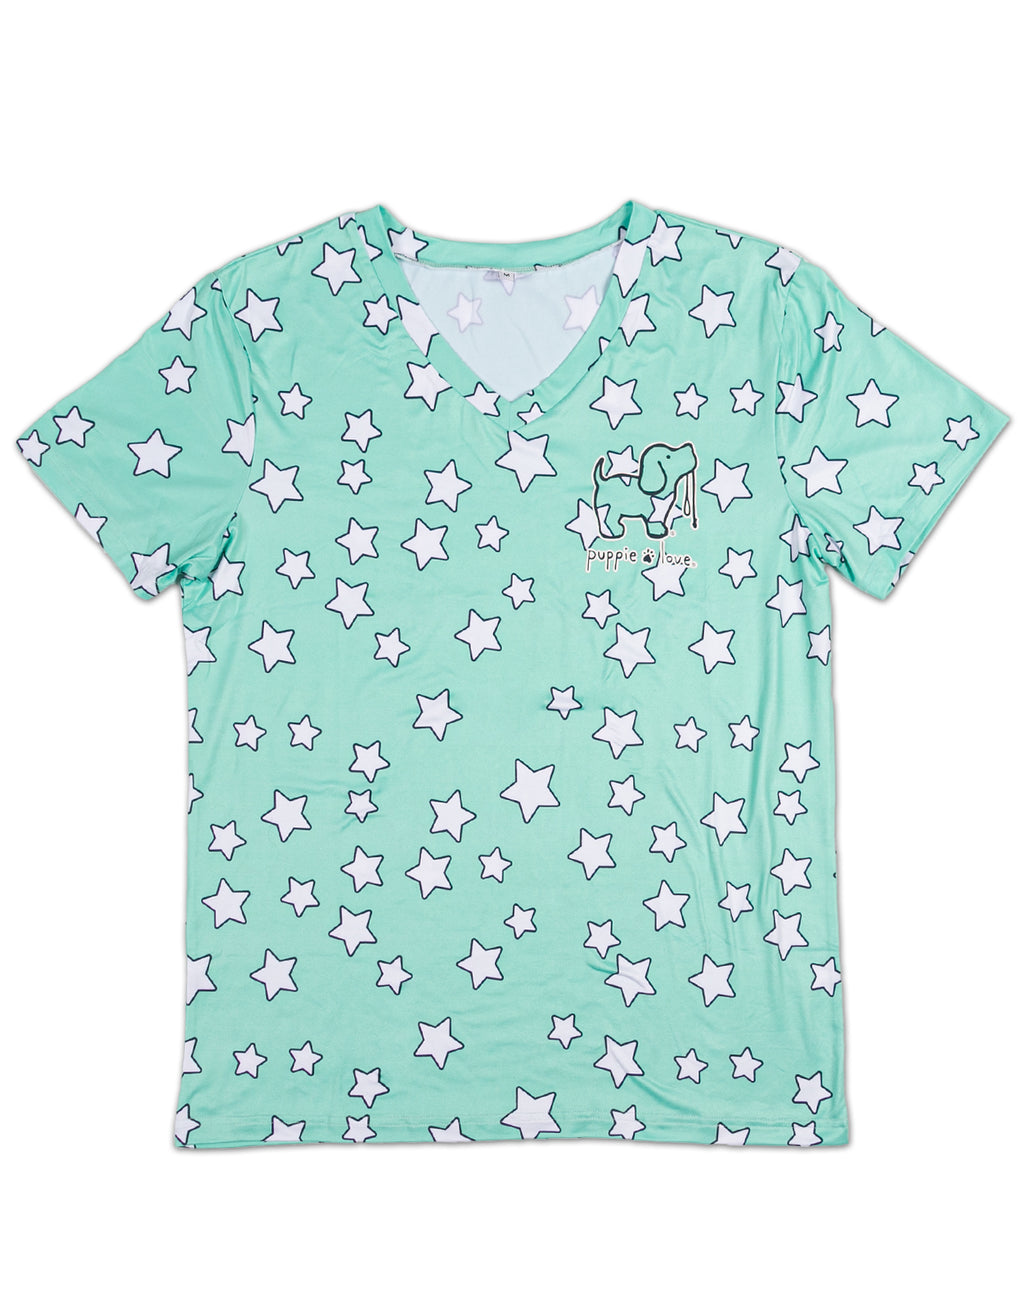 STARRY PUP LOUNGE V-NECK - Puppie Love